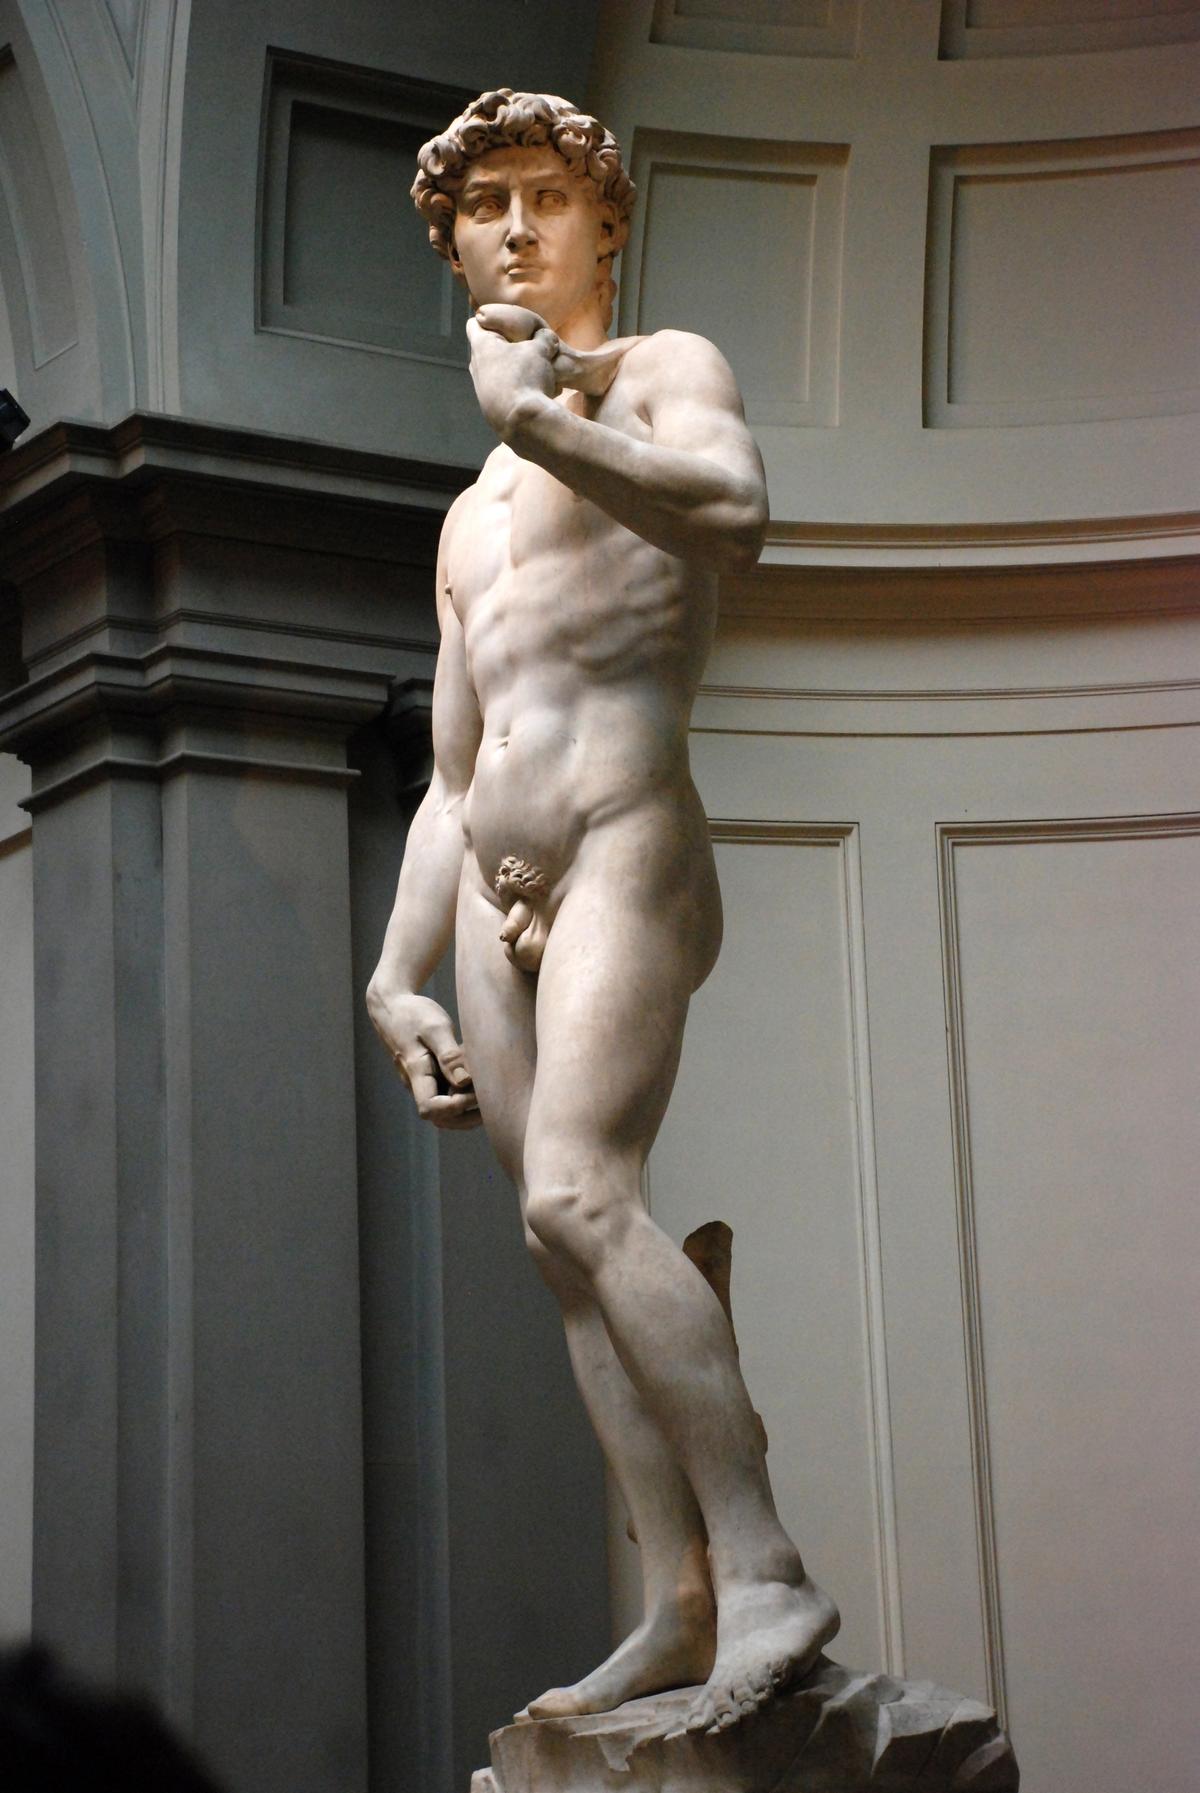 Michelangelo's David (1501-04) in situ at the Galleria dell'Accademia in Florence Photo by MarcusObal, via Wikimedia Commons